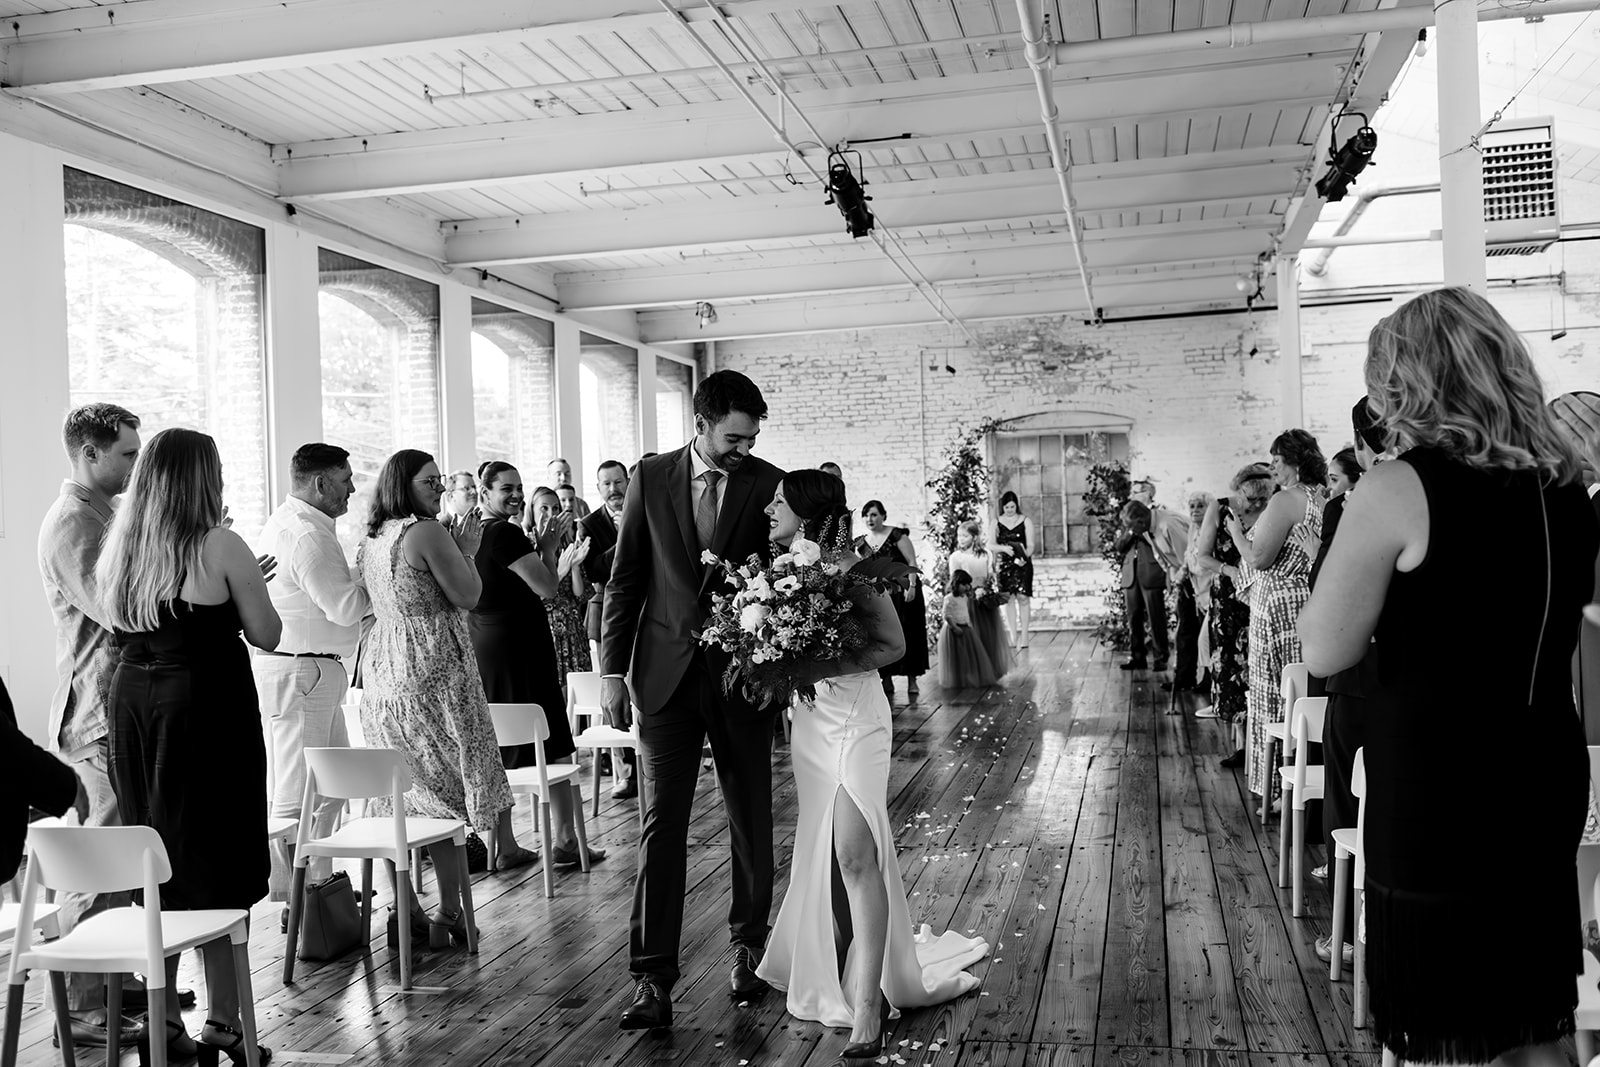 Bride and groom walk back down the aisle after being married. 